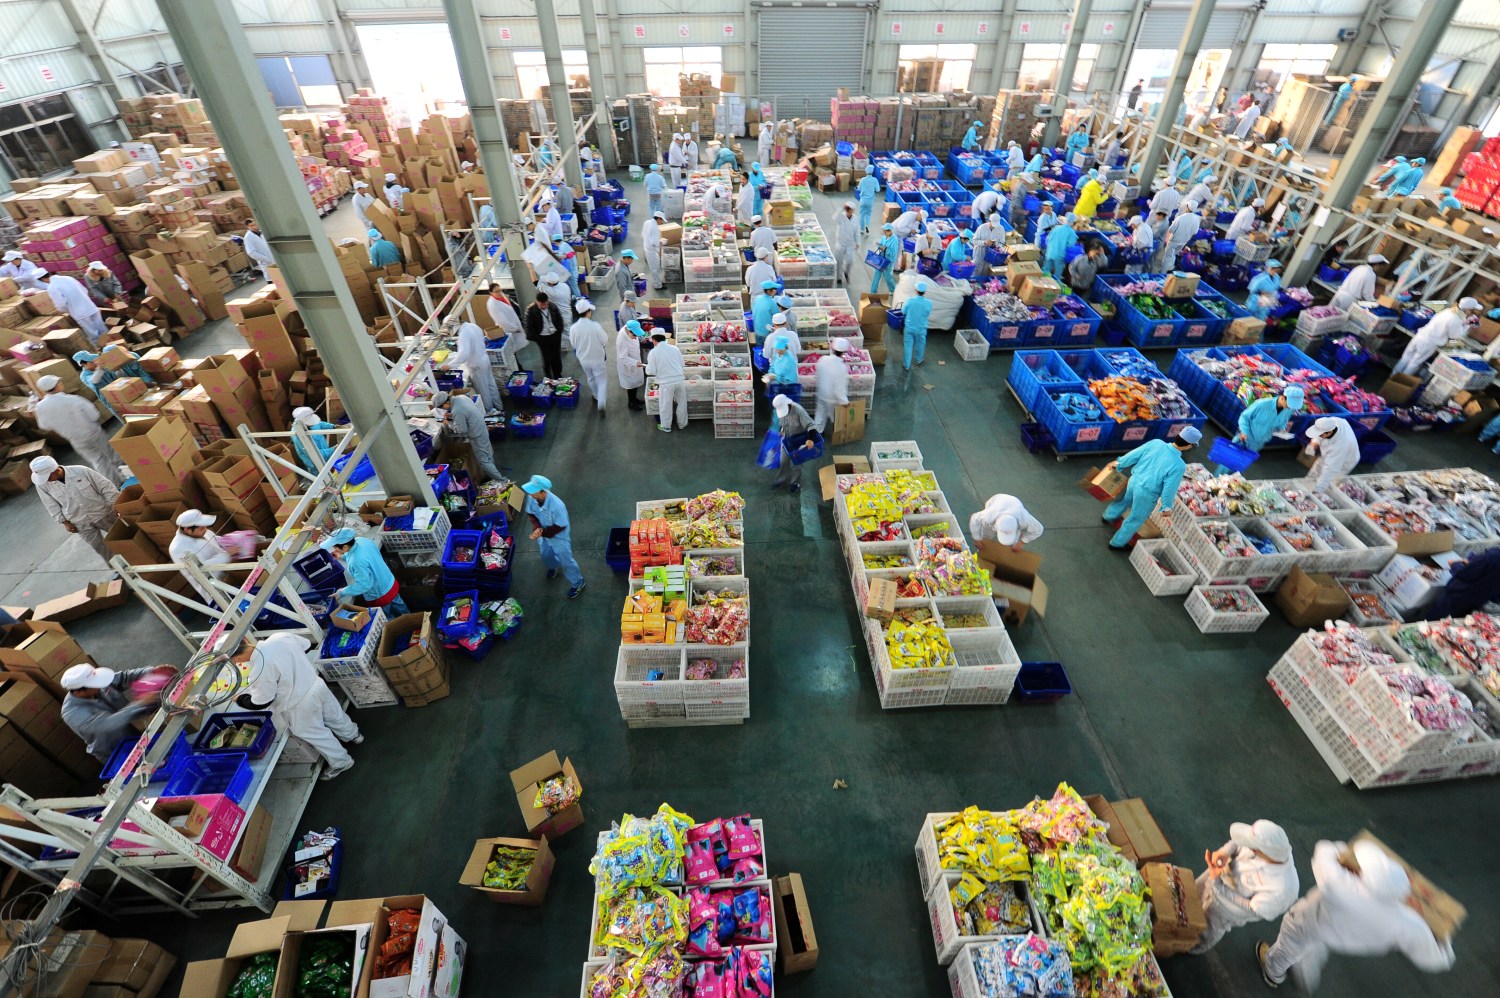 Employees work extra hours to pack products at a factory during the 11.11 shopping festival, in Taicang, Jiangsu province.